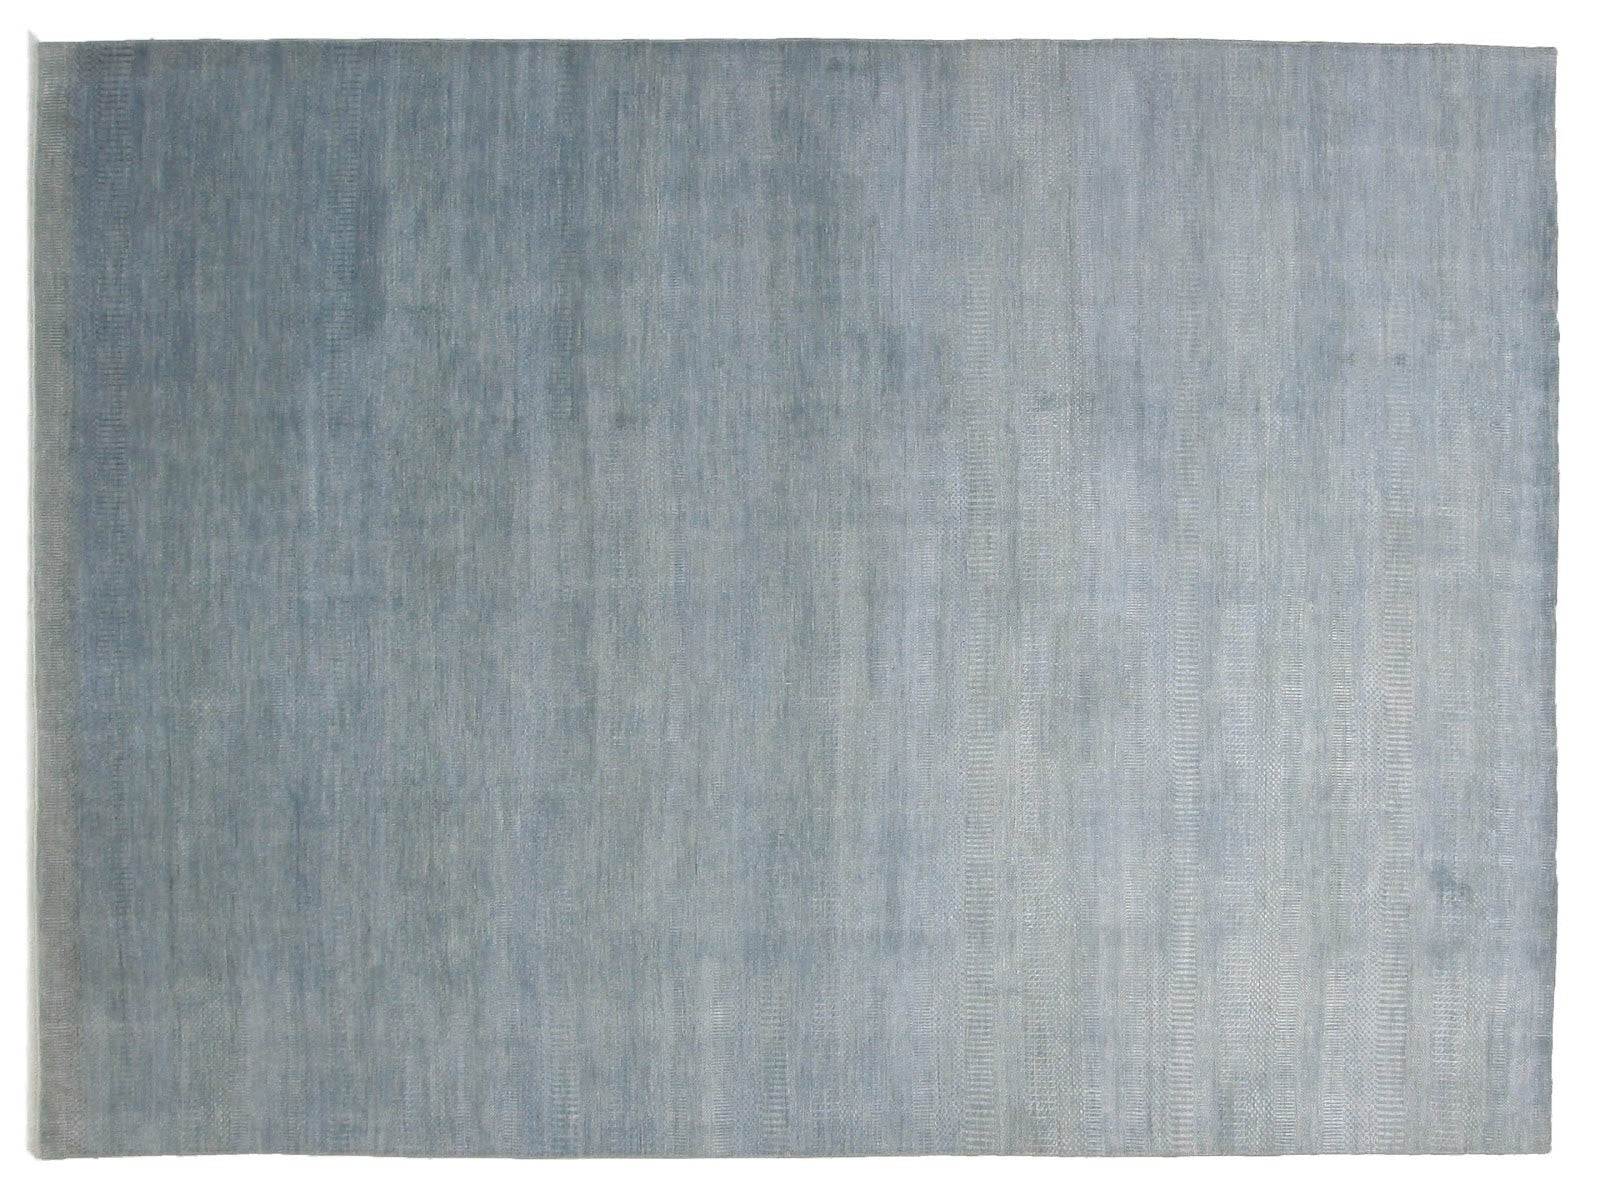 10x14 modern wool area rug featuring a one-tone sky blue, hand-knotted in Pakistan.